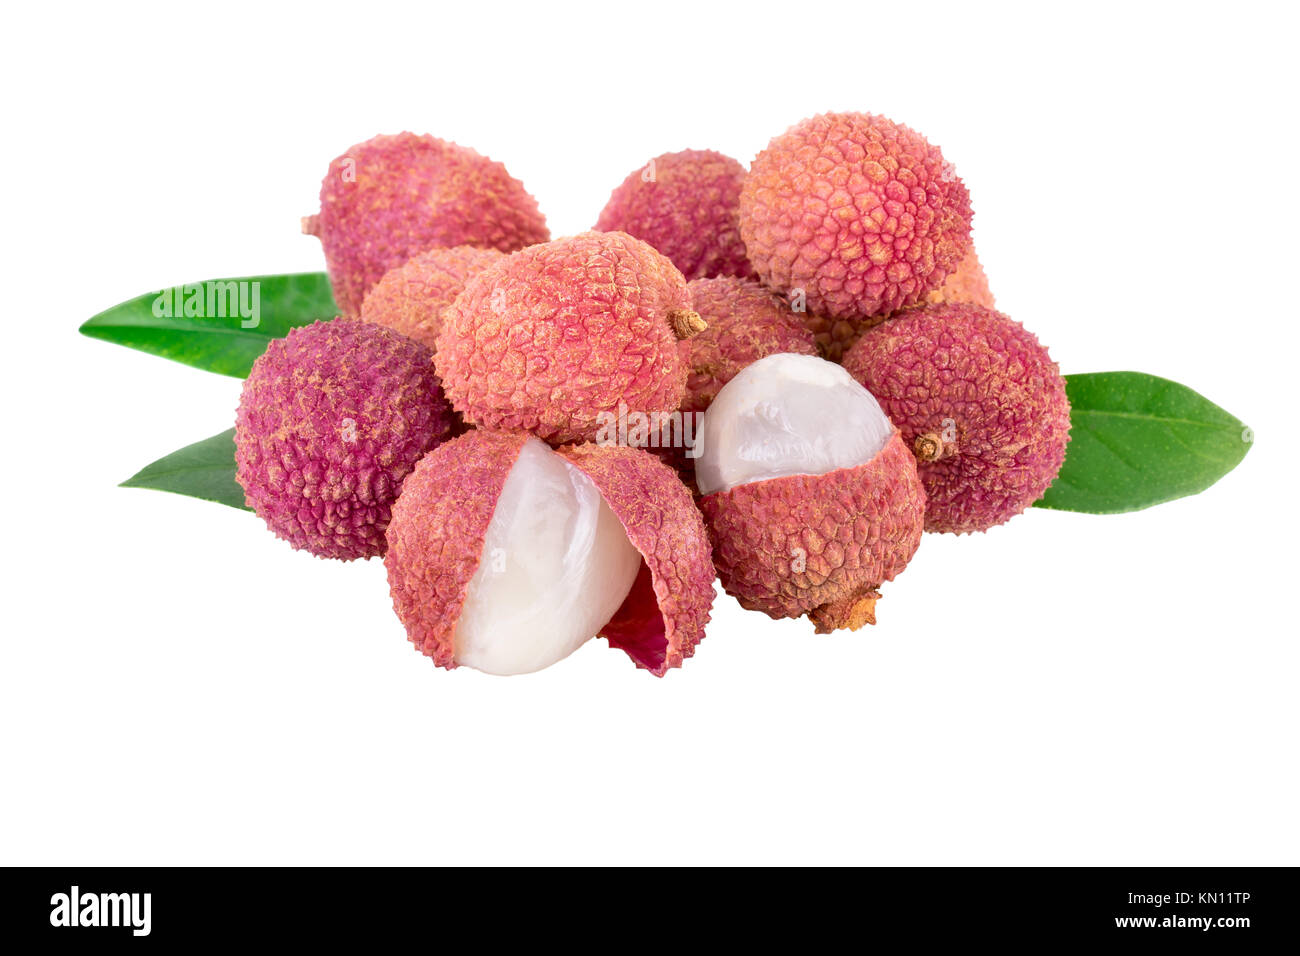 Lychee fruits on white with clipping path Stock Photo